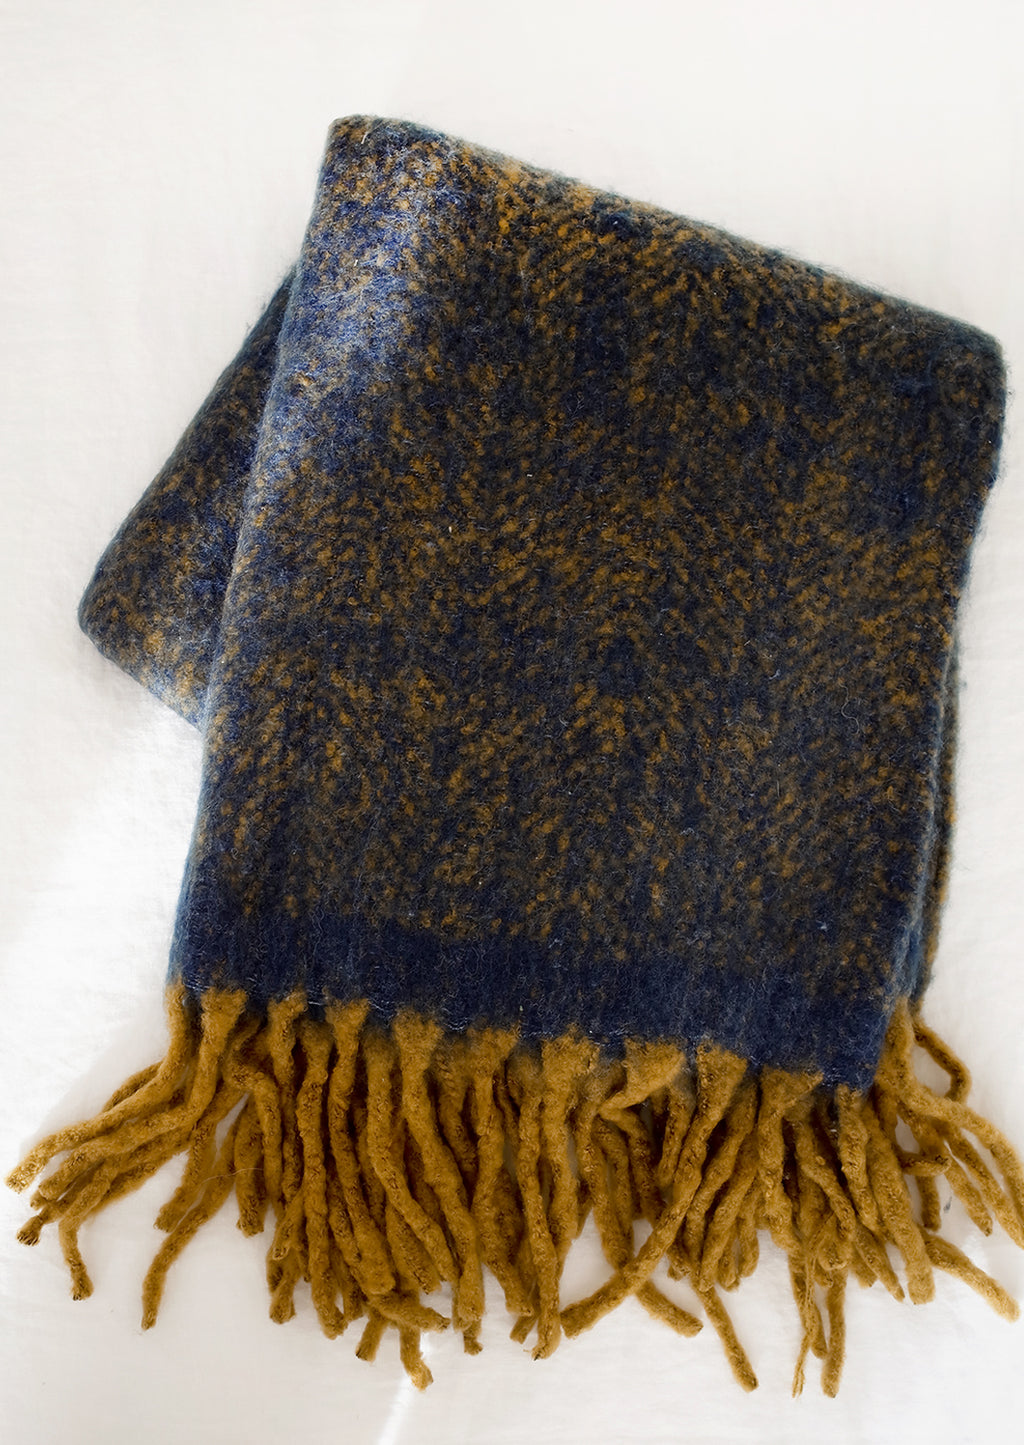 2: A fuzzy mohair-like blanket in navy and mustard with mustard tassel trim.